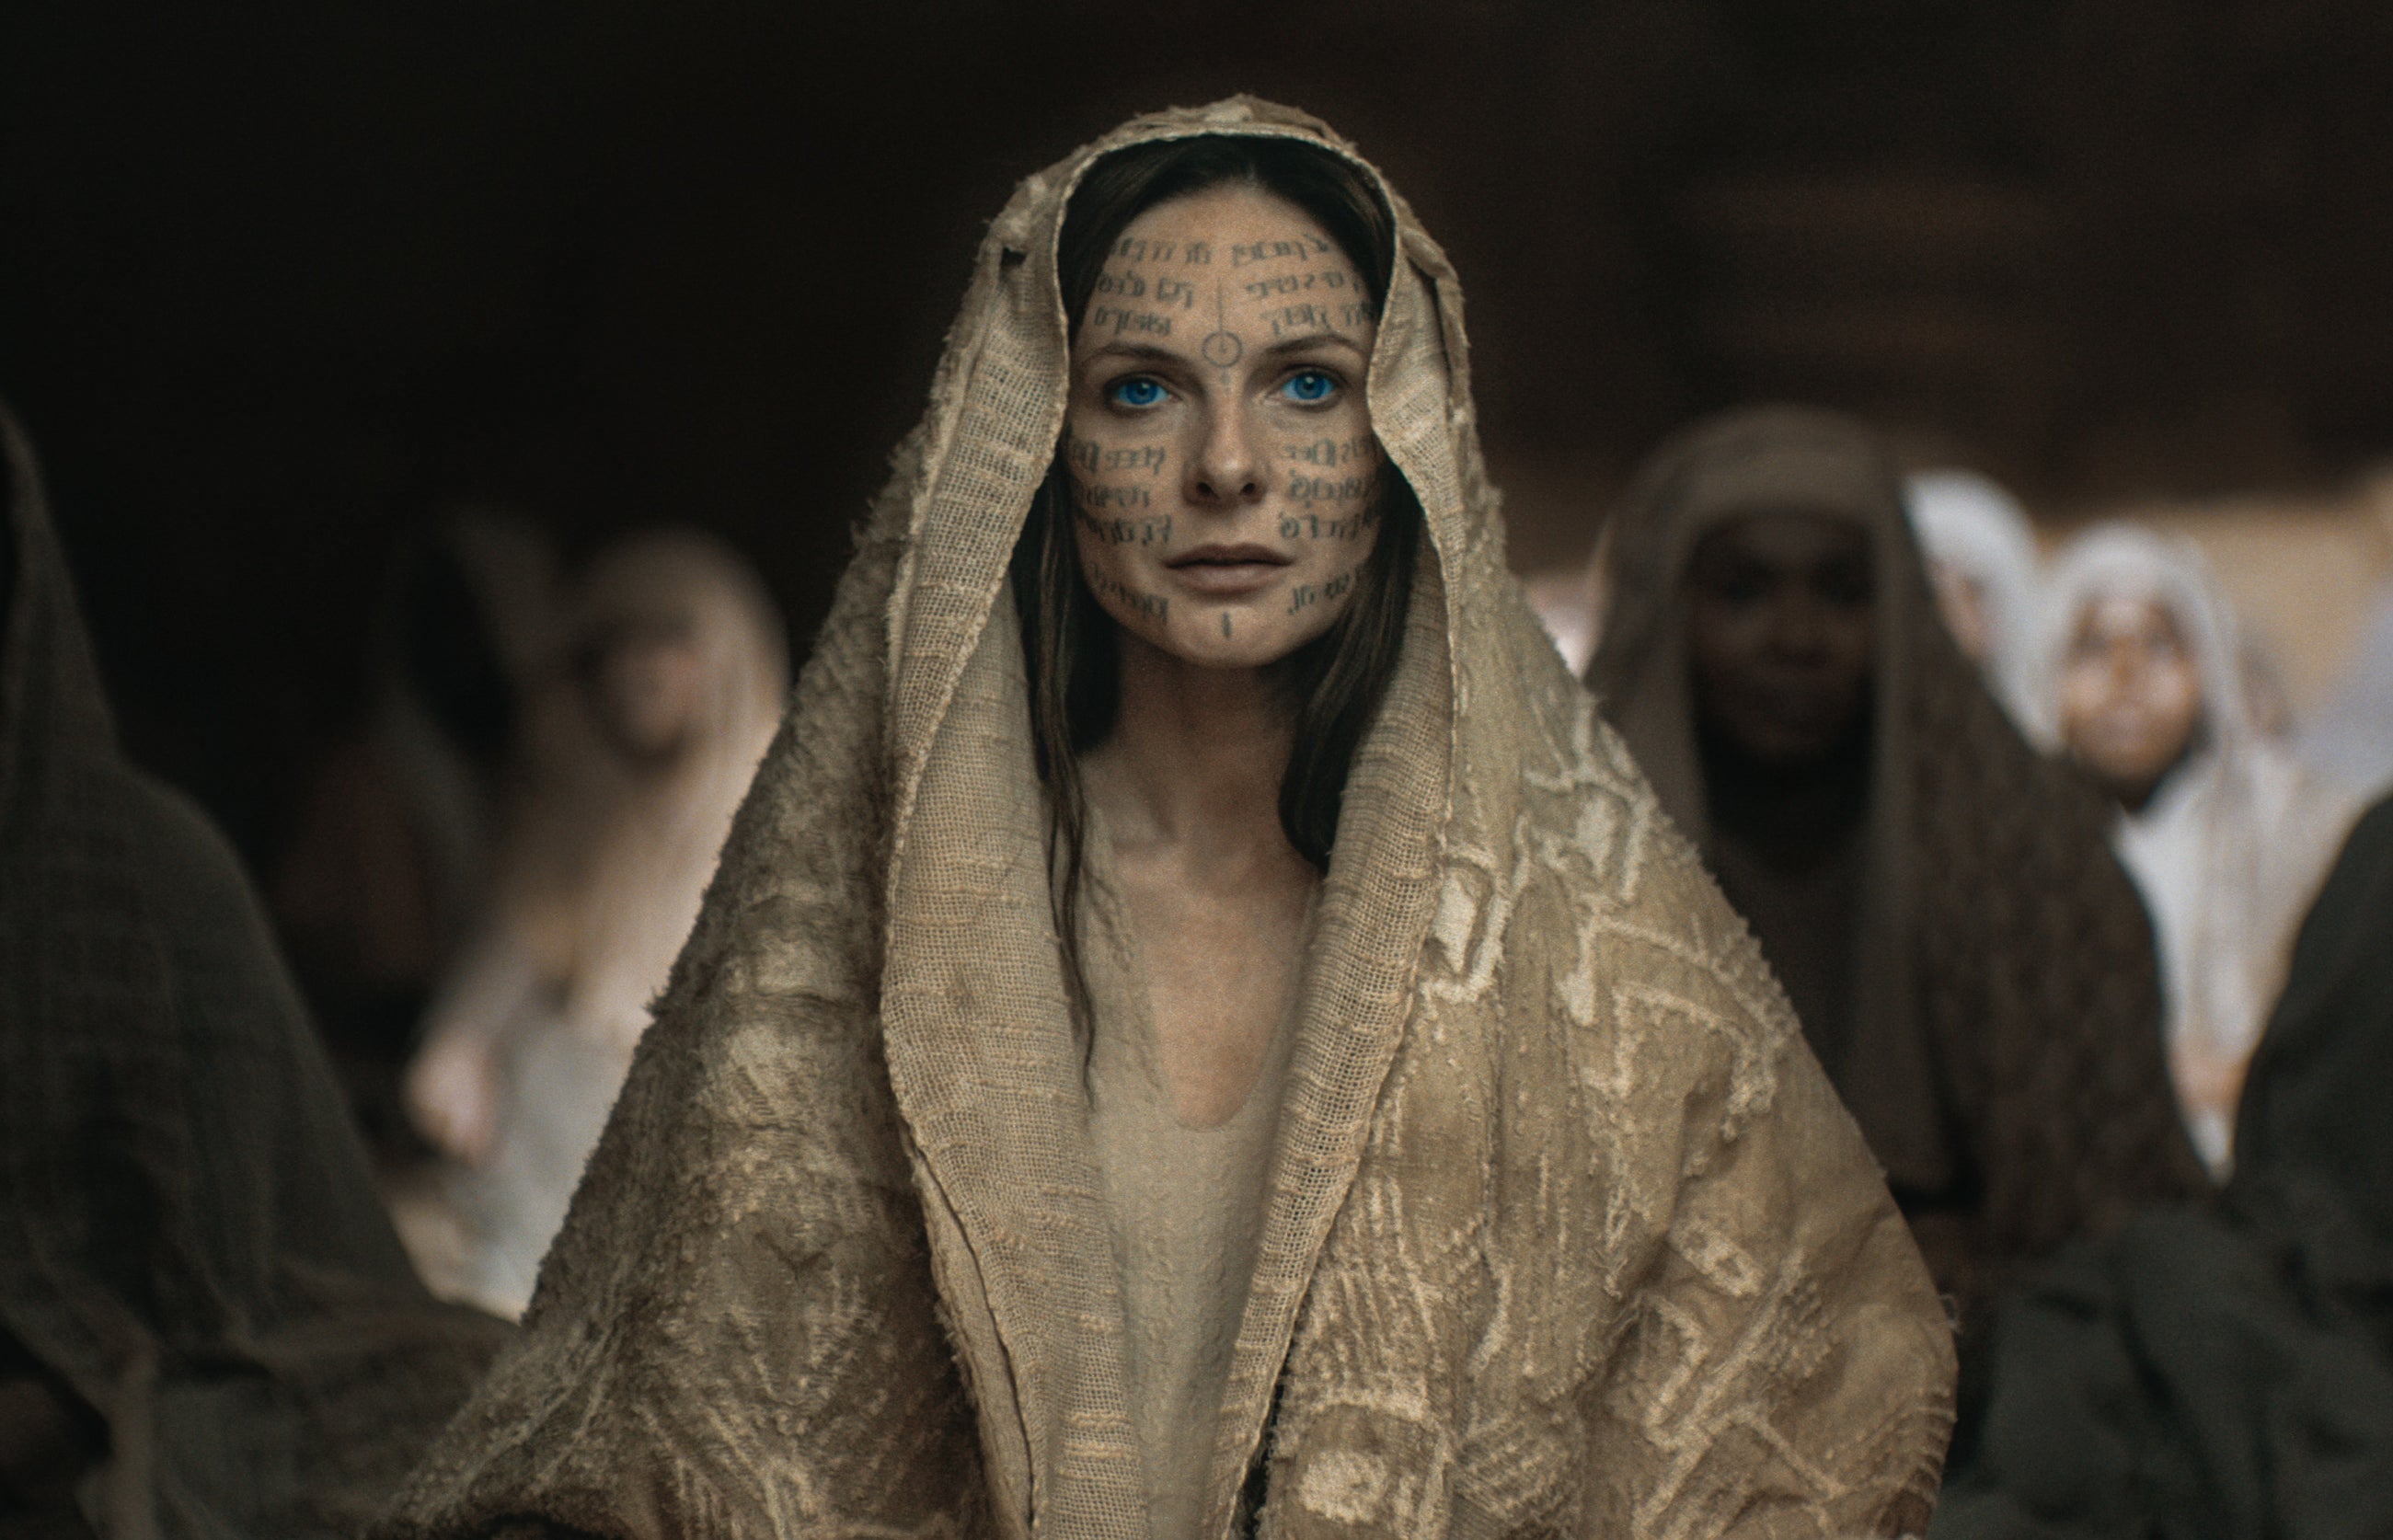 Rebecca Ferguson in character as Jessica with ceremonial facial markings, draped in a textured shawl, with extras in the background